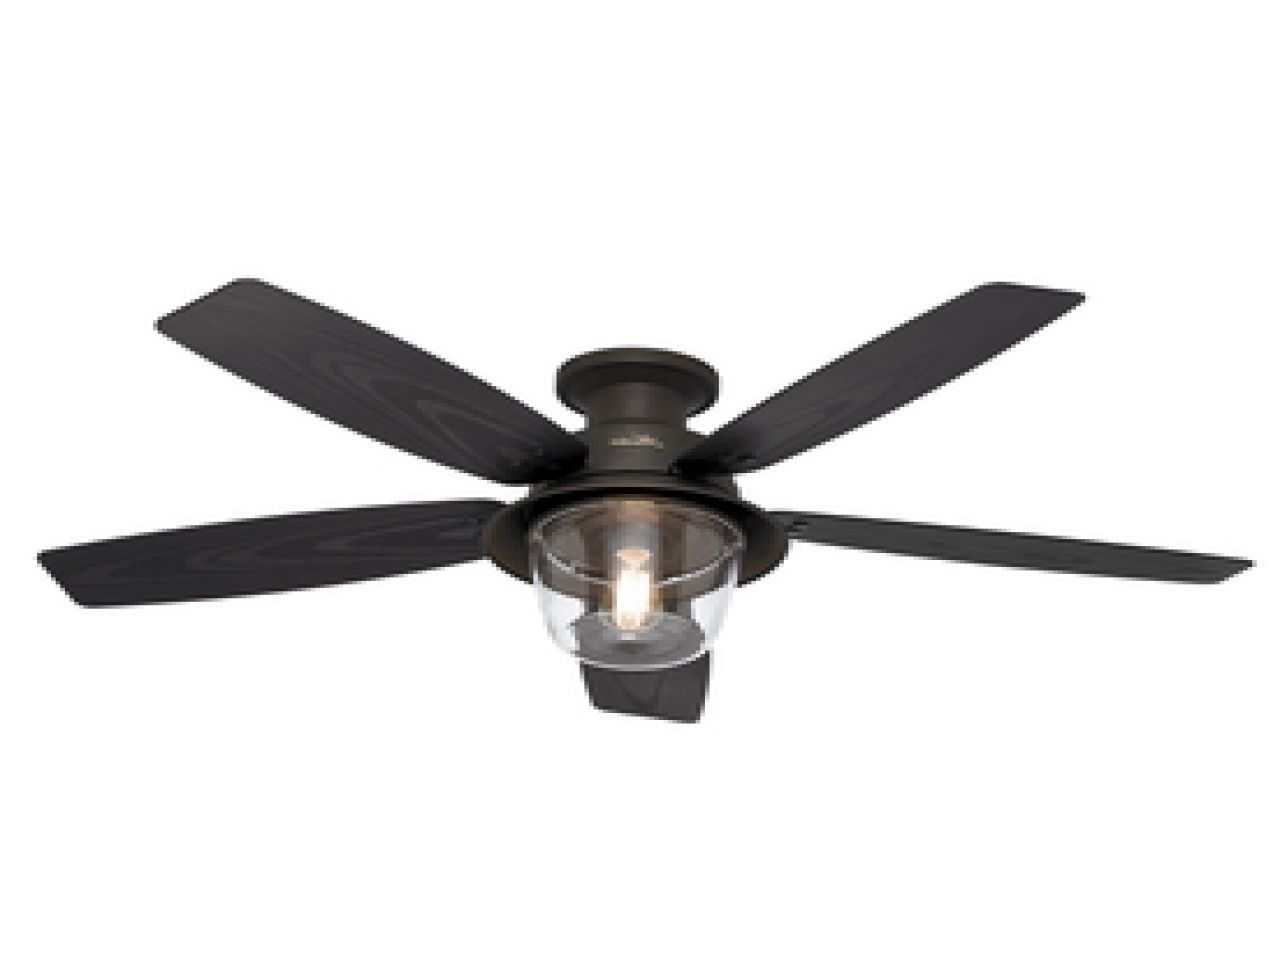 Ceiling: Astounding Small Outdoor Ceiling Fan Hunter Outdoor Ceiling For Popular Hunter Outdoor Ceiling Fans With Lights (View 5 of 20)